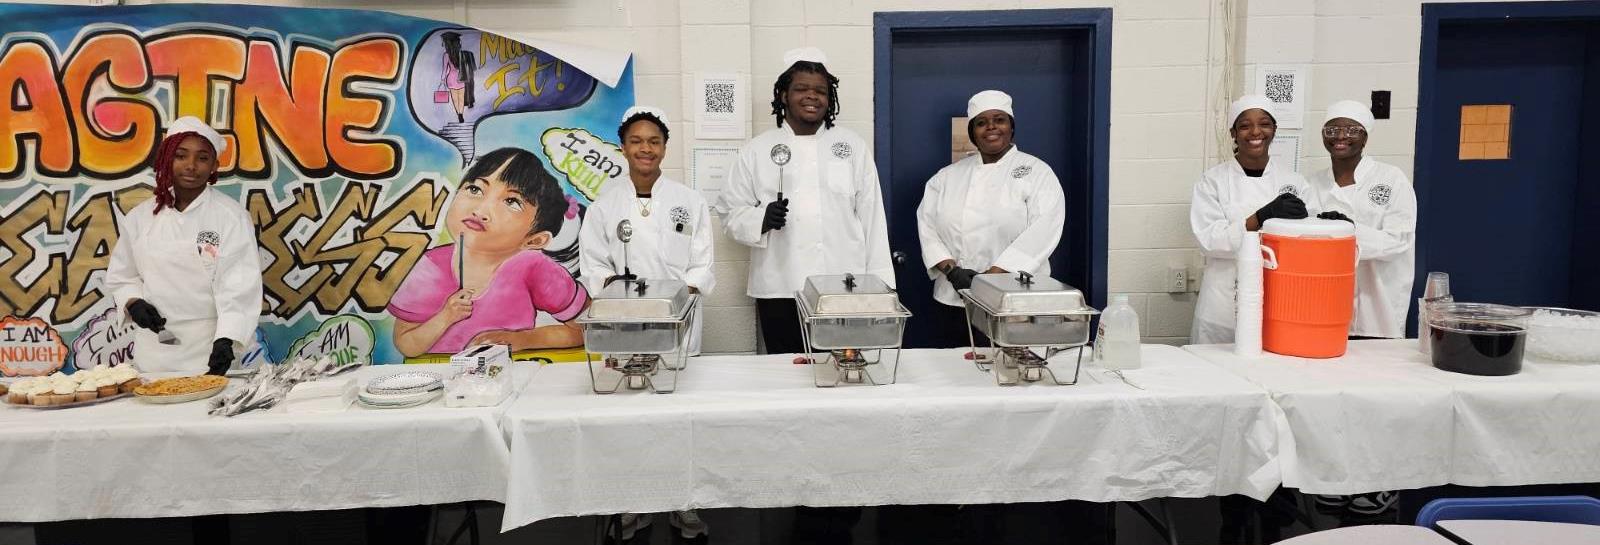 culinary students standing behind table with serving pans on them